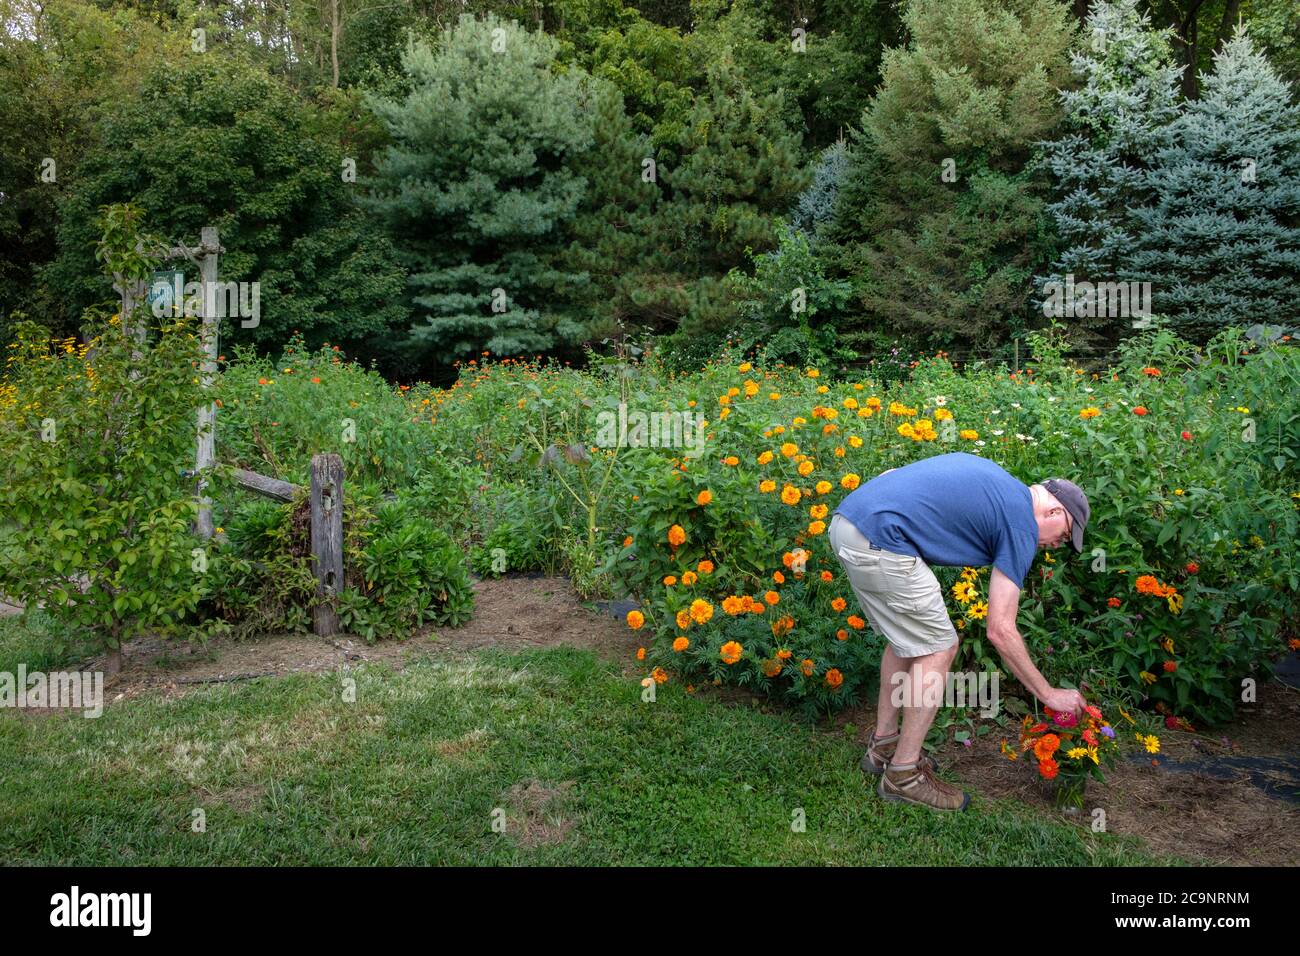 Man gathering flowers at a Pick your own flower Cutting Garden at Solebury Orchards, New Hope, Bucks County, Pennsylvania, USA Stock Photo